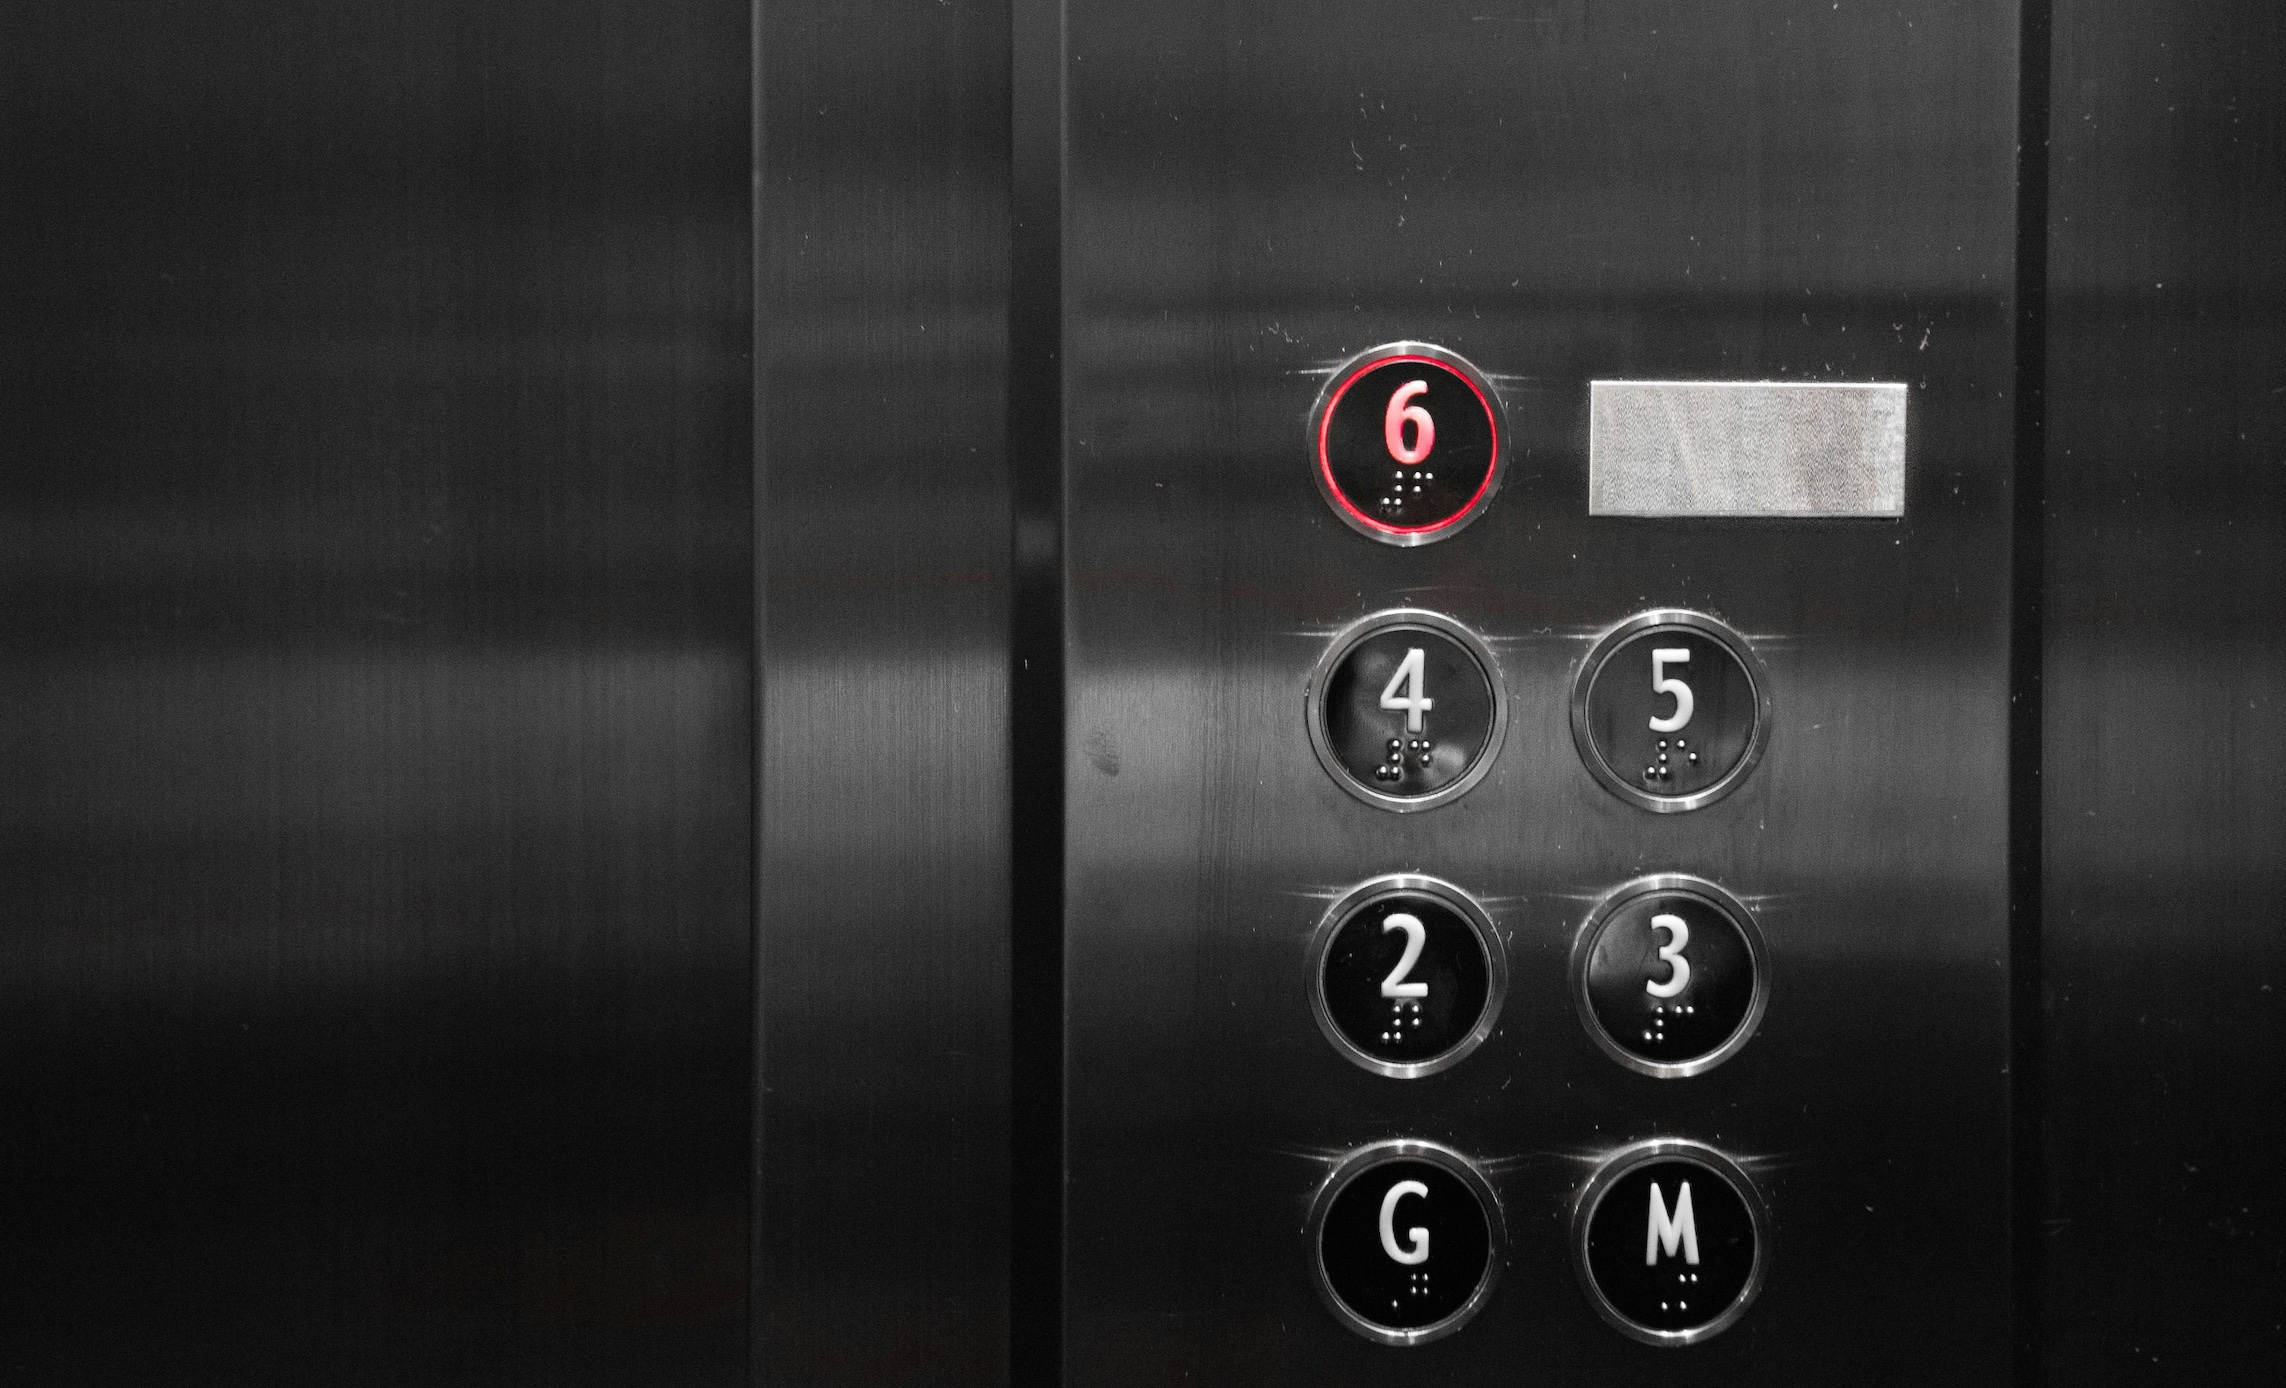 Metal elevator wall with buttons, number six lit up in red; image by Arisa Chattasa, via Unsplash.com.